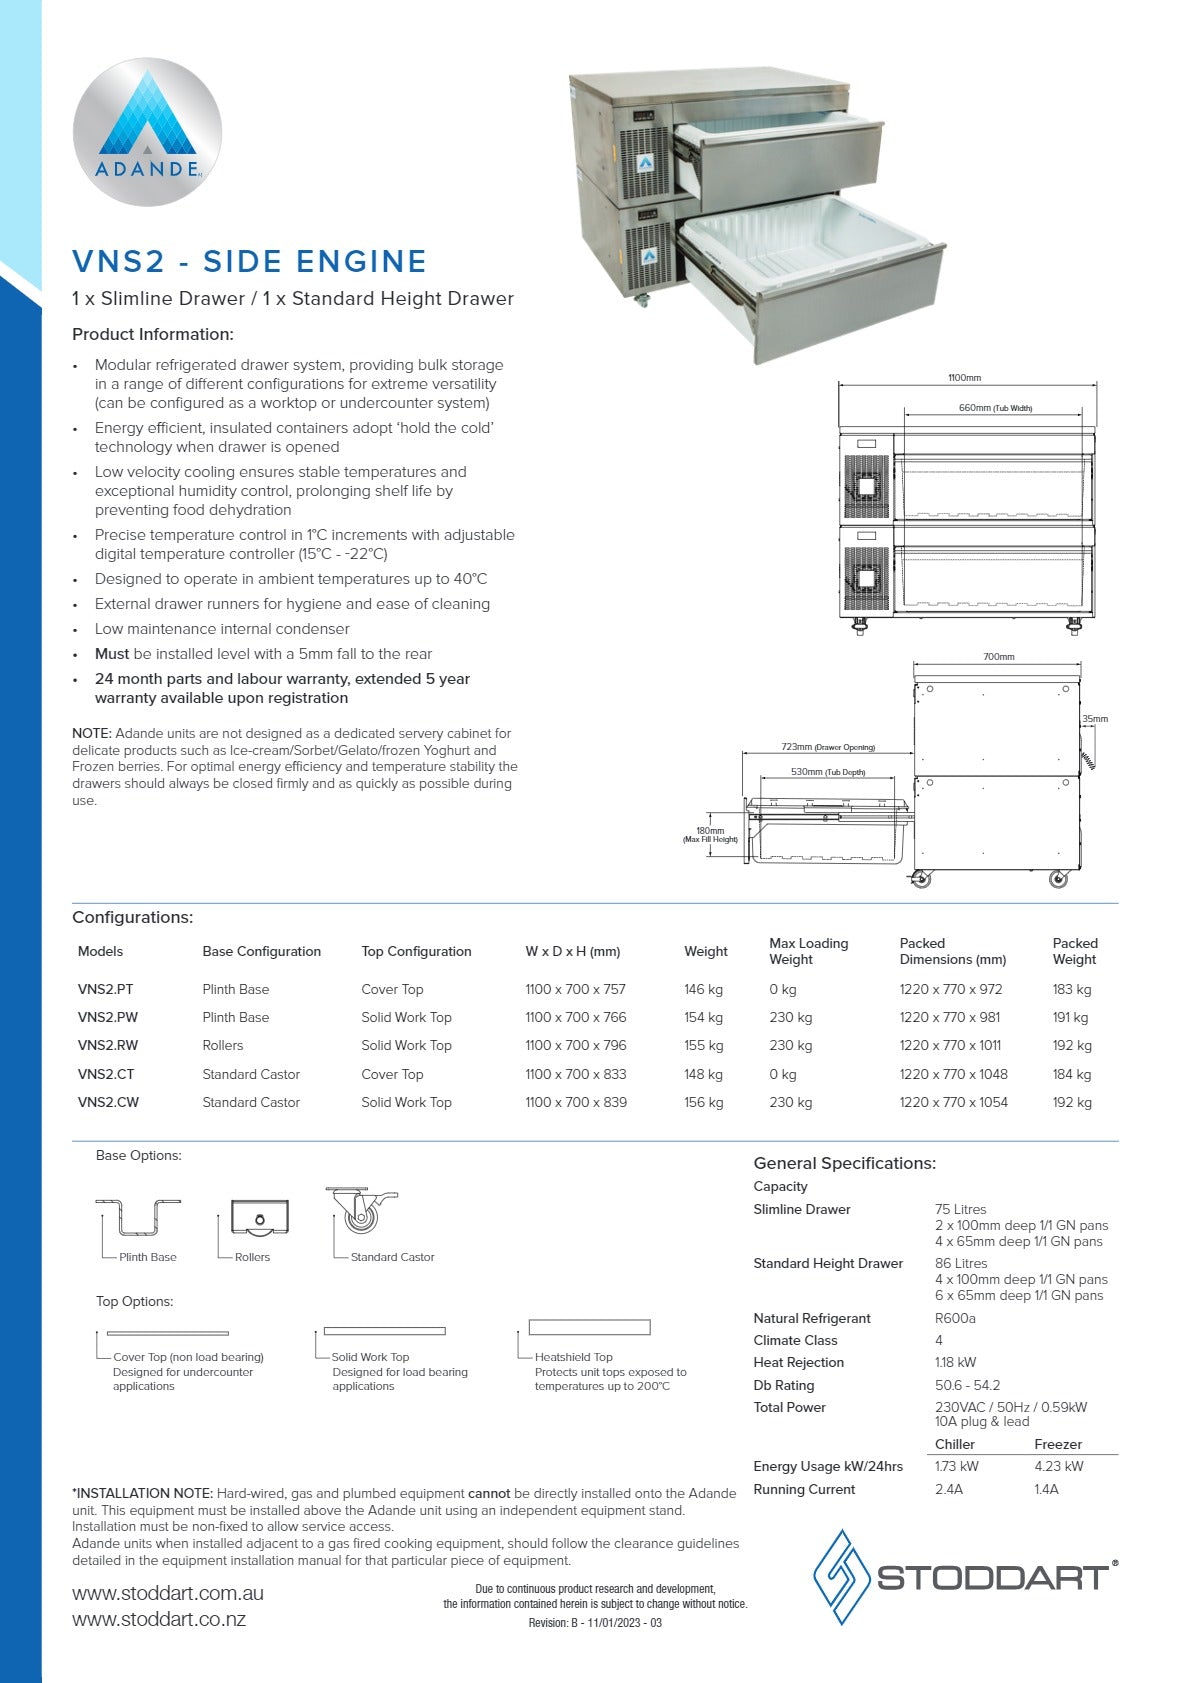 Thumbnail - Adande VNS2.CT - Dual Temperature Drawers